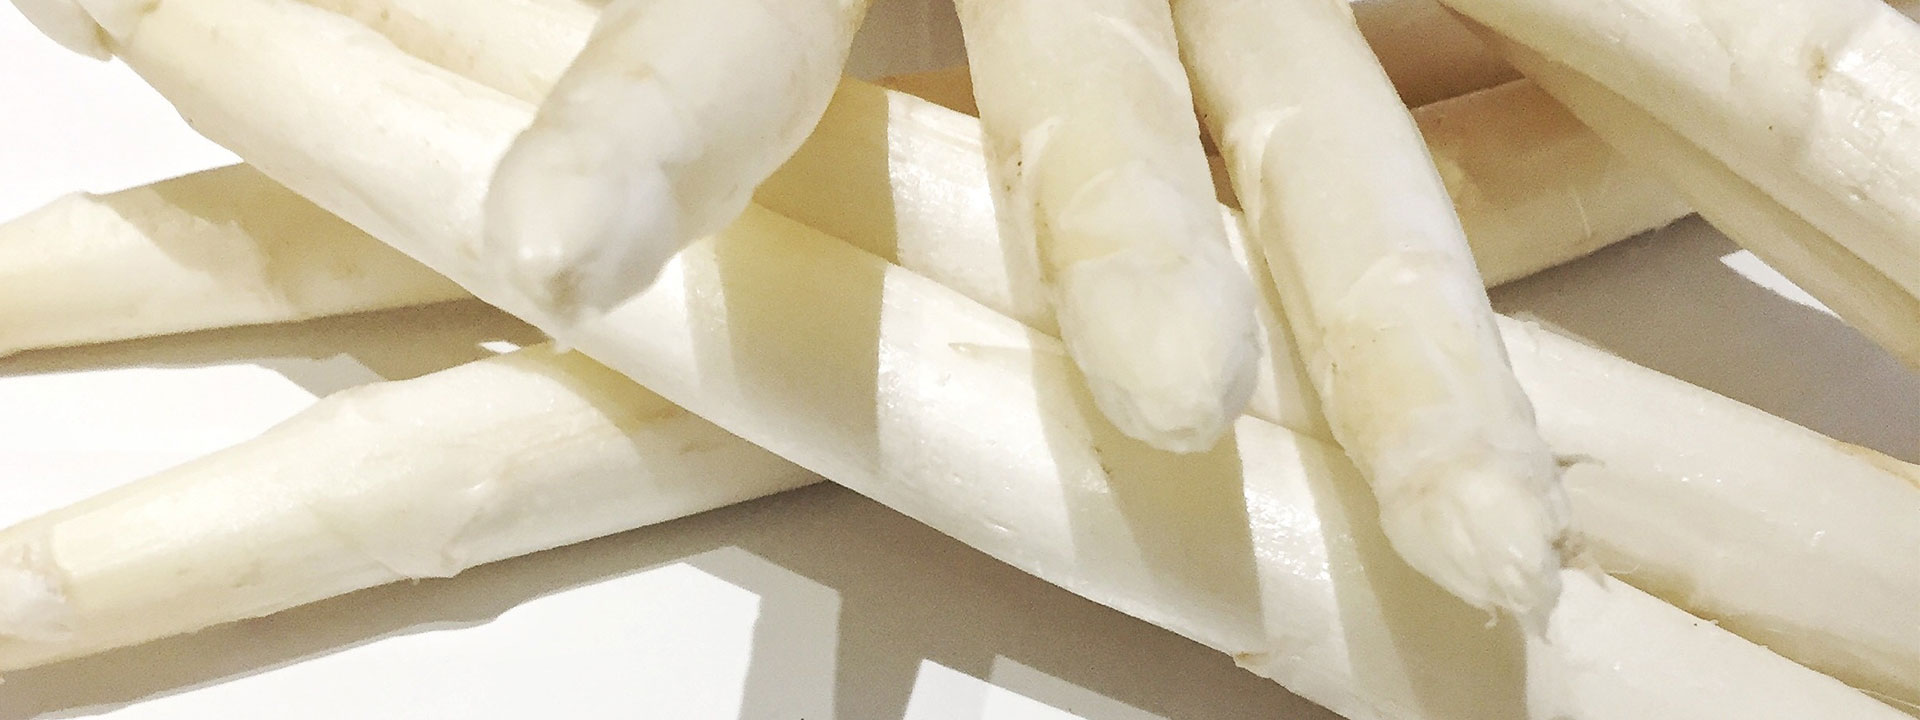 
Several white asparagus on a white surface.